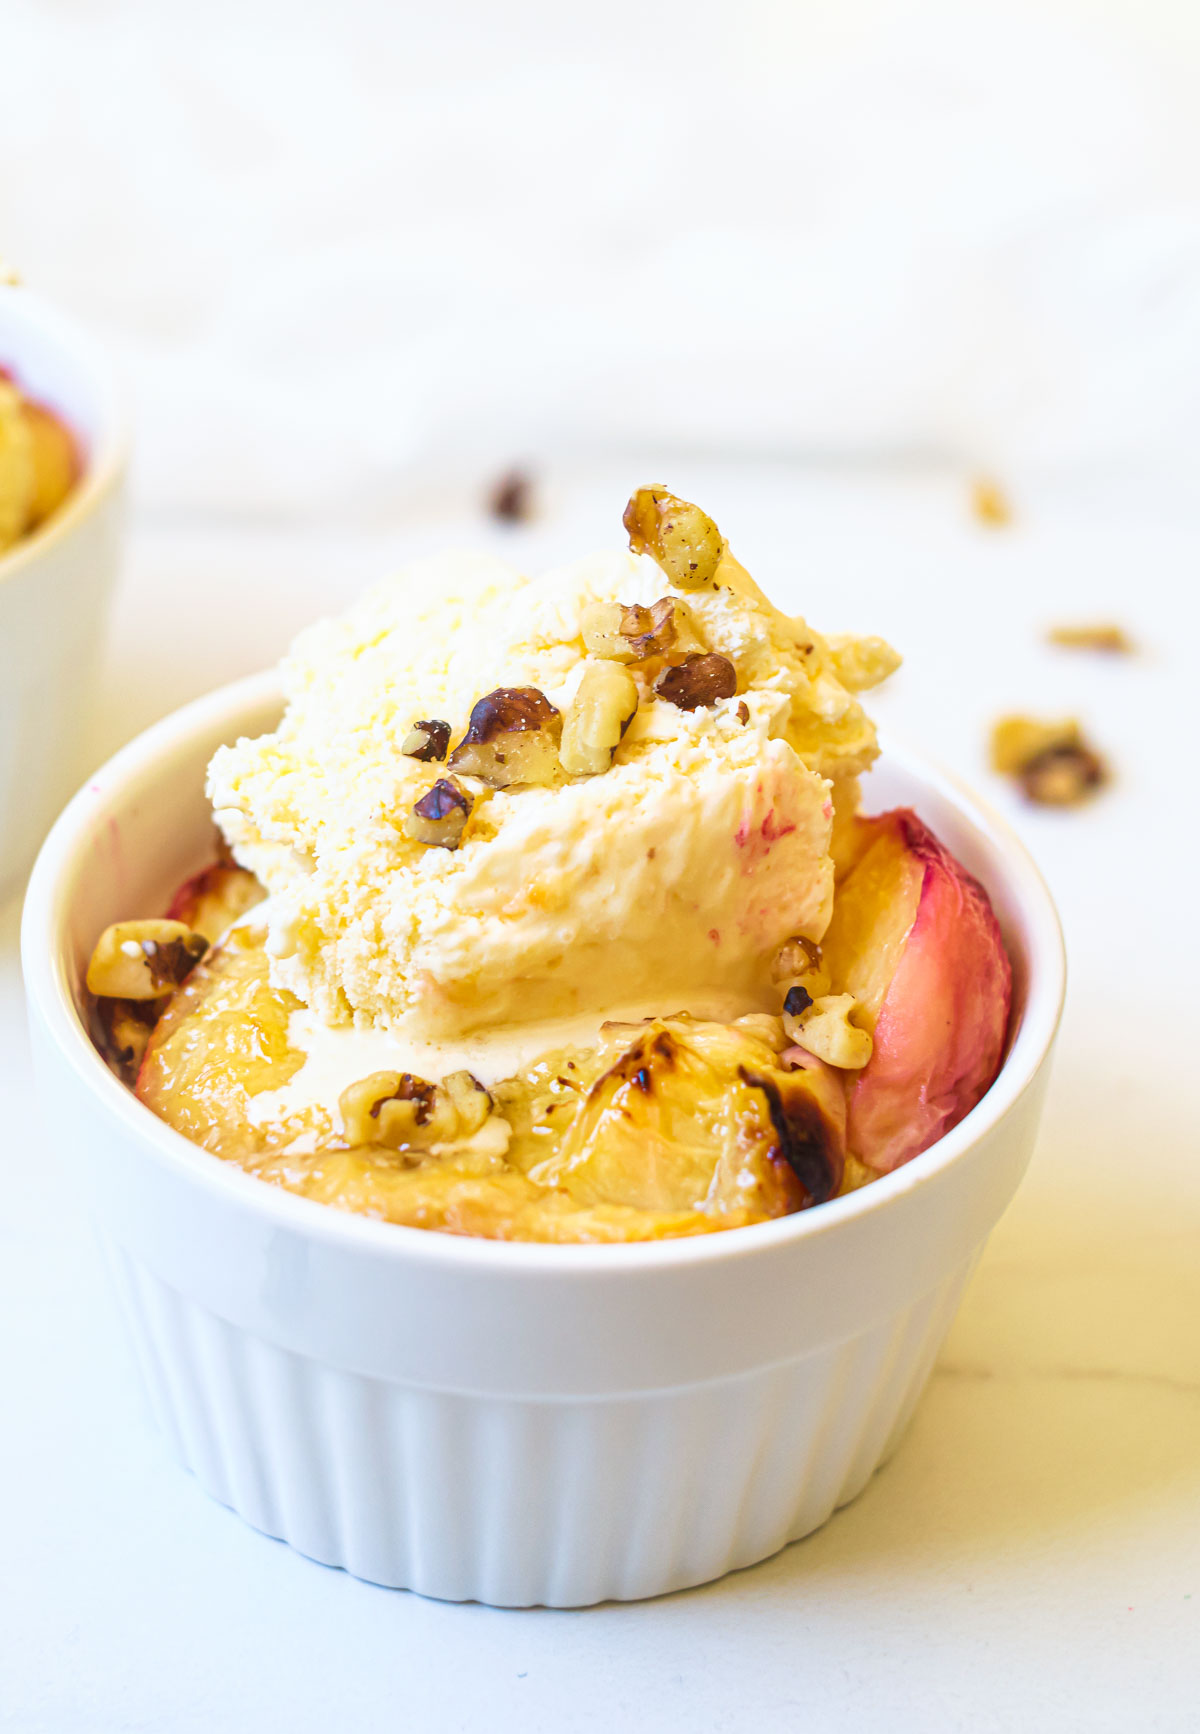 grilled peaches served with ice cream and walnuts